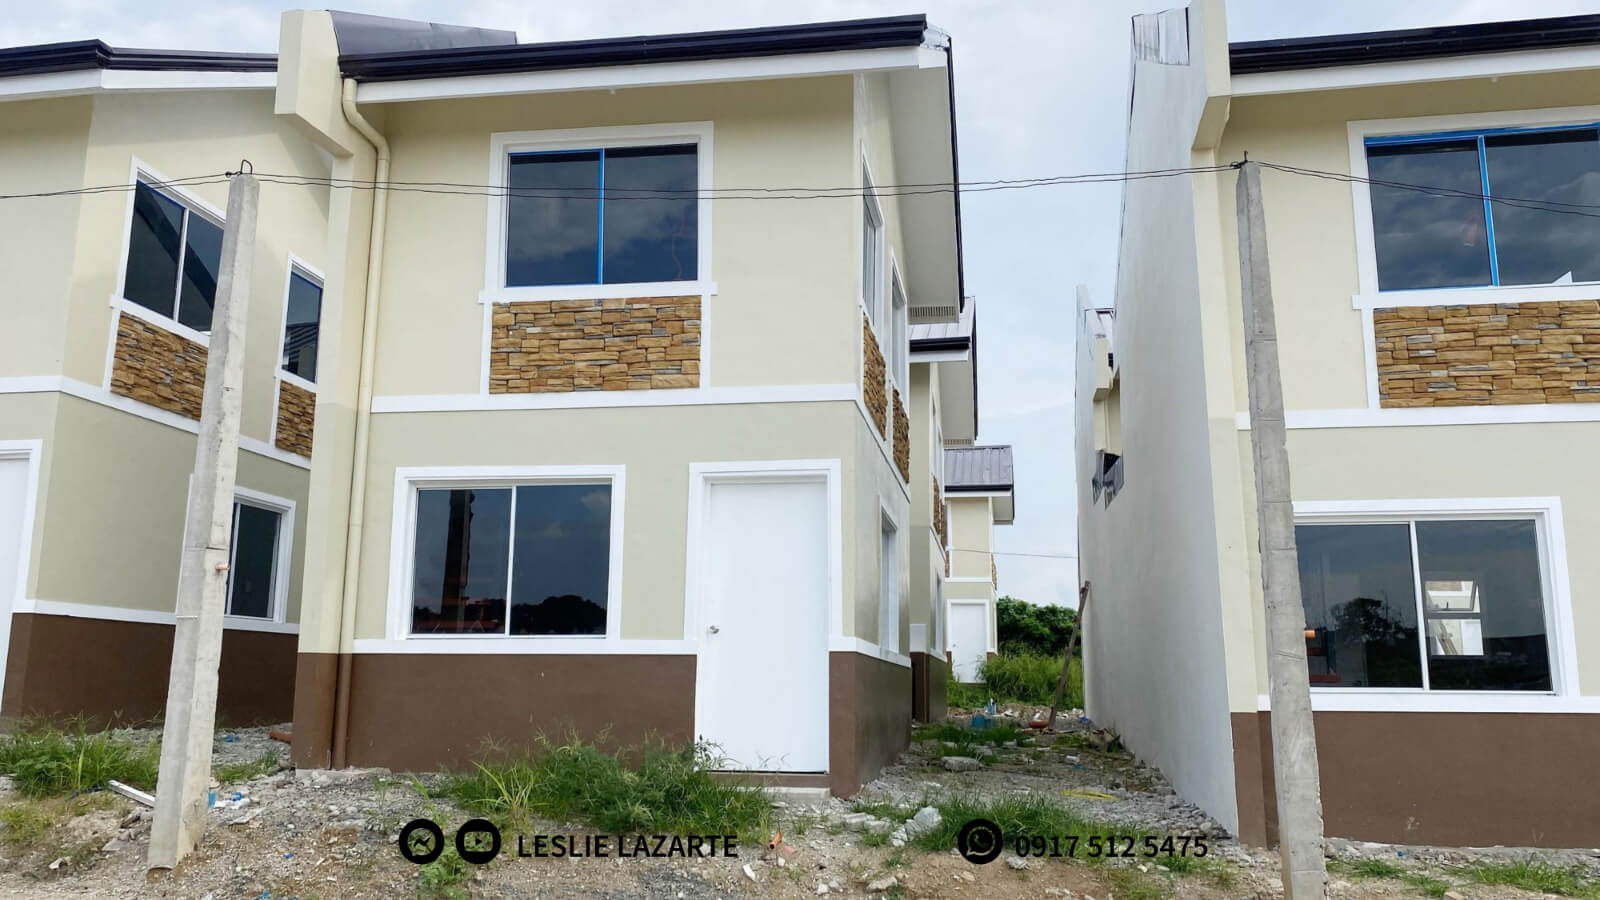 Woodlands Trece Martires - Jasmine Single Attached | House and Lot for Sale Pag-IBIG Trece Martires Cavite | AXEIA Development Corporation